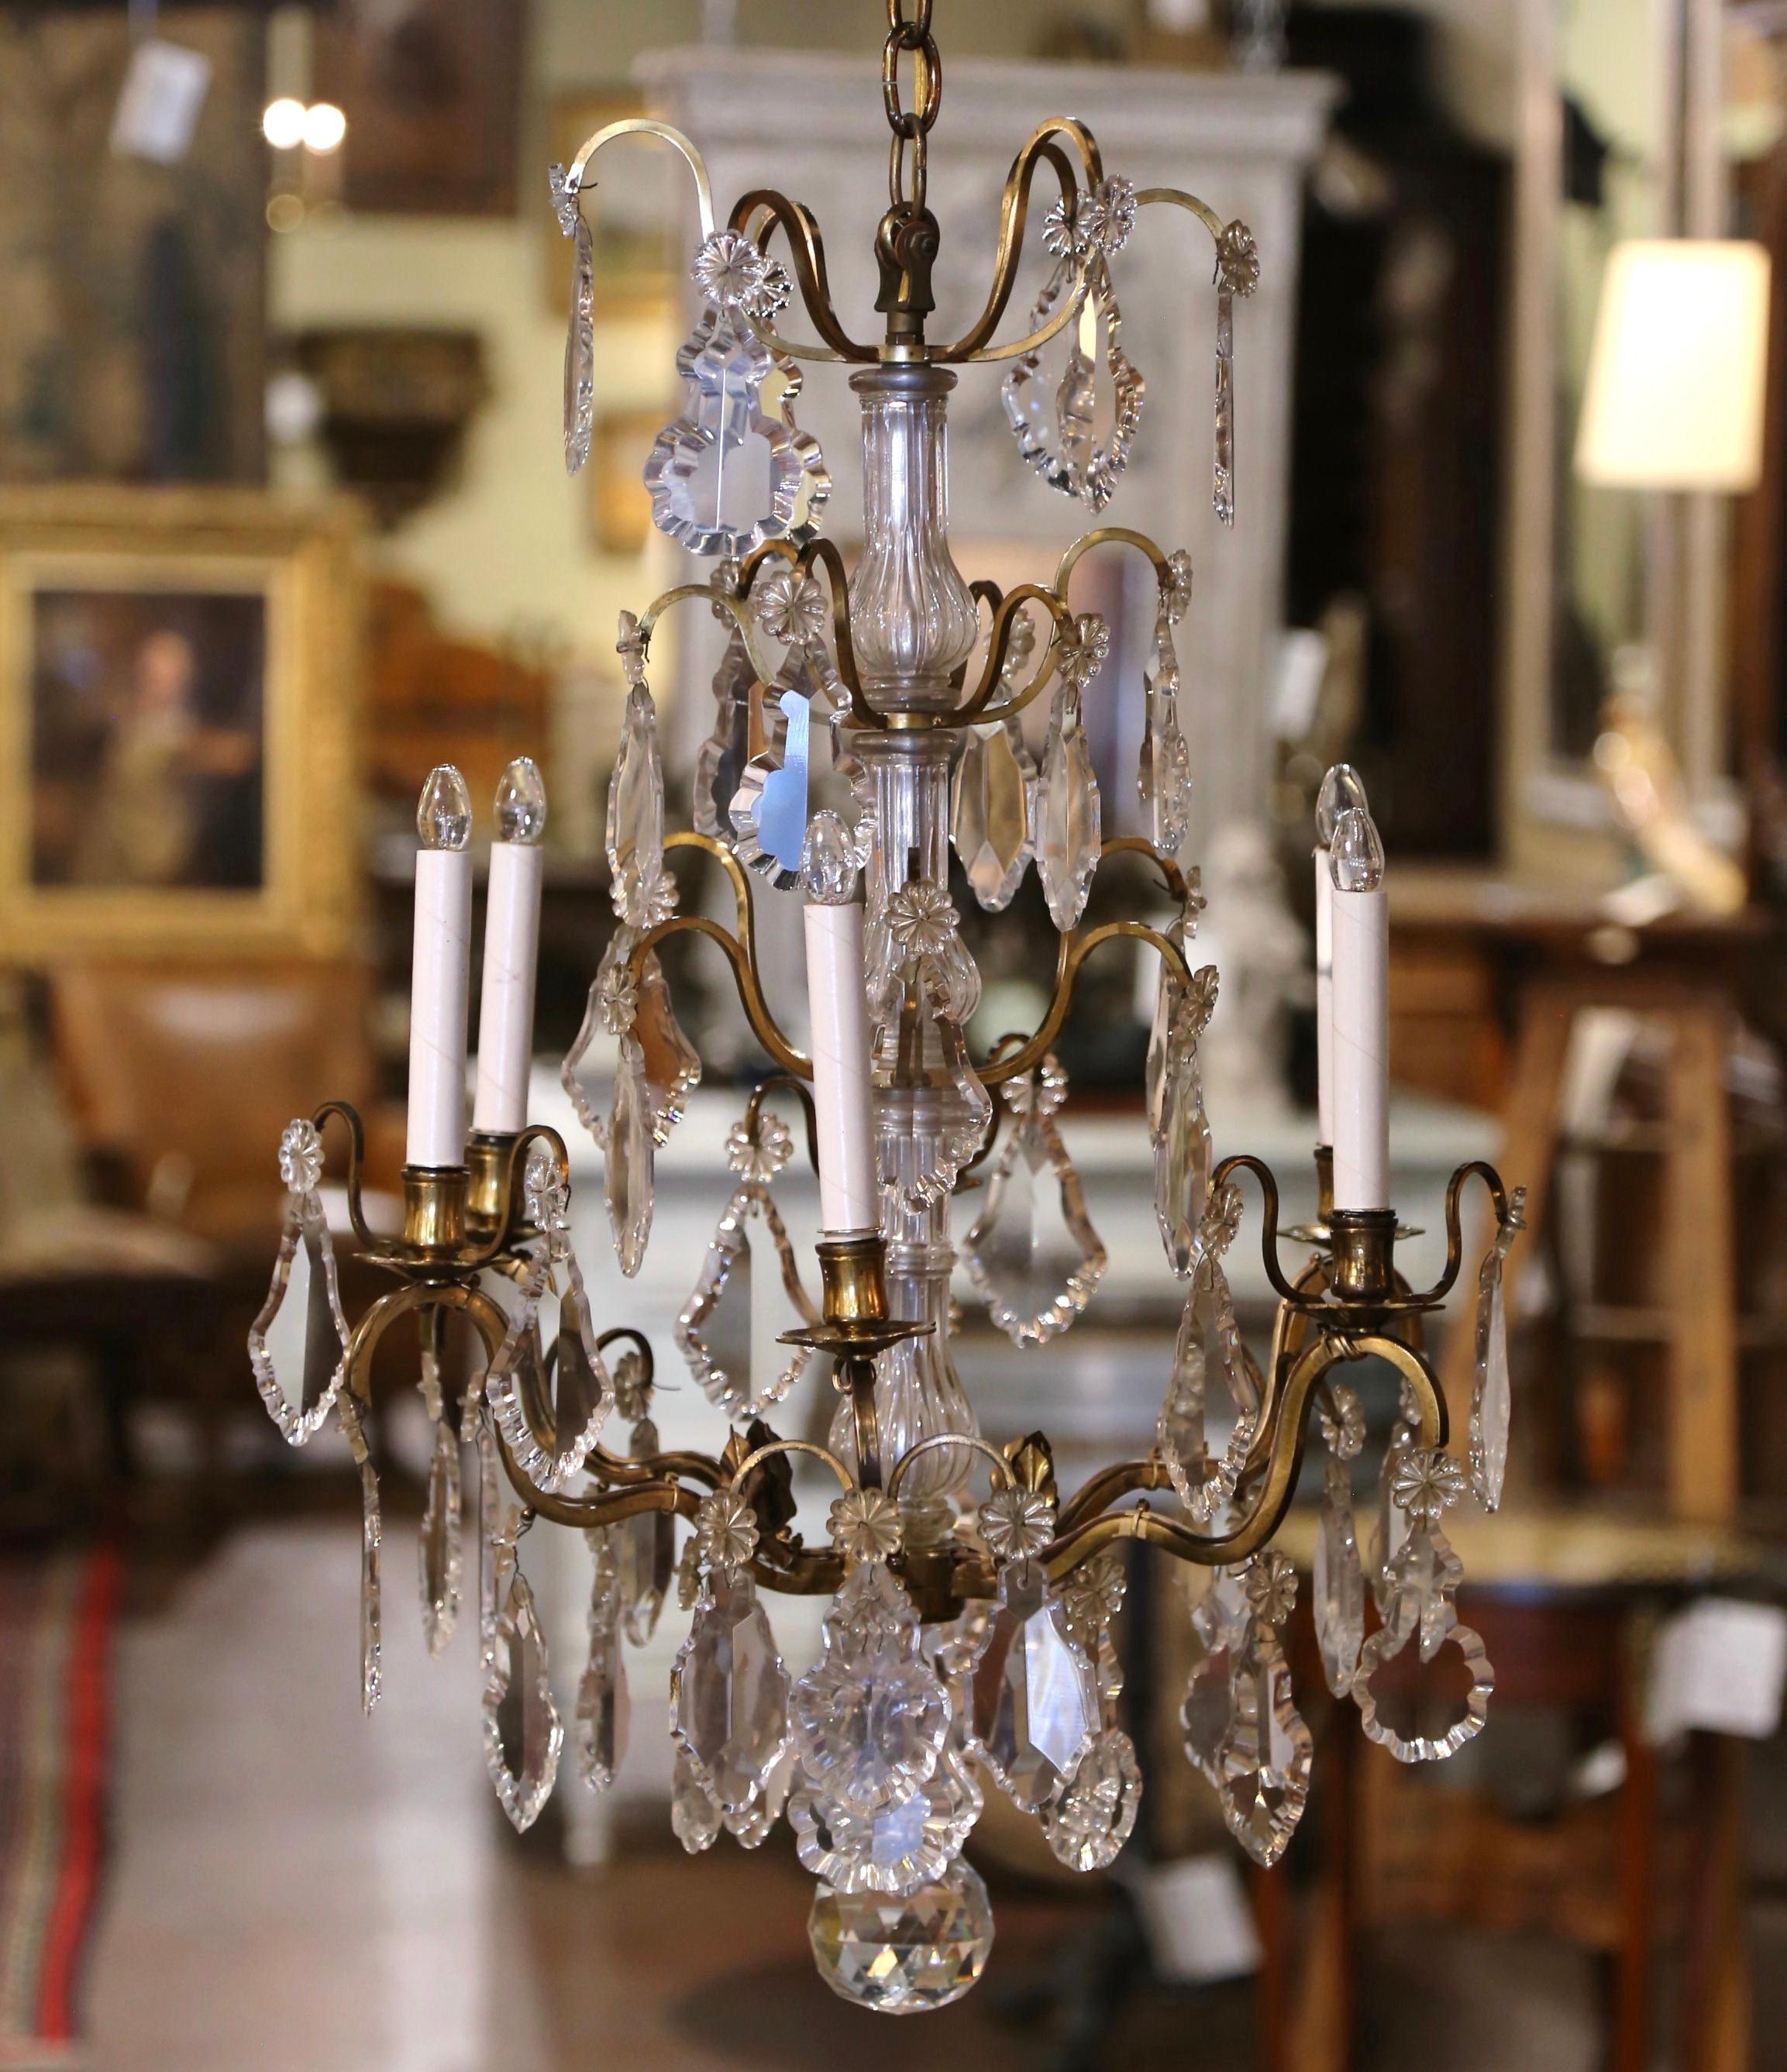 This elegant Baccarat style crystal and bronze light fixture was created in France, circa 1870. The intricate antique chandelier has six lights newly wired on one tier with luxurious swags of cut crystal and pendants hanging throughout. The